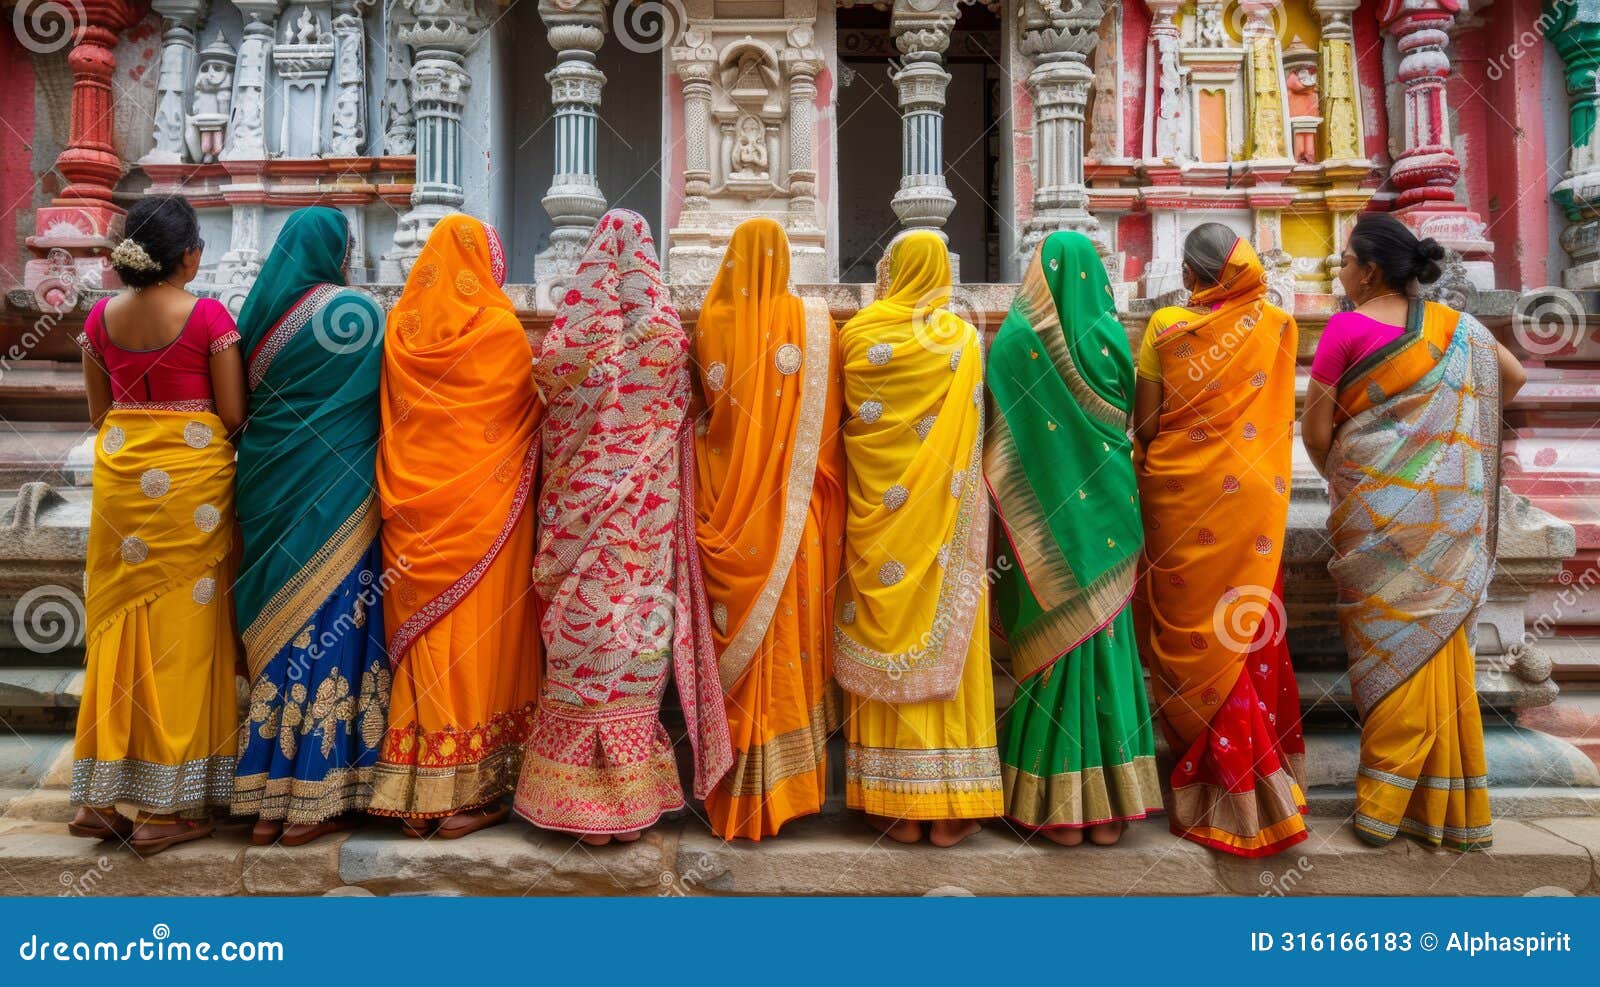 indian women in vibrant saris stand outside an ornate temple, showcasing cultural fashion